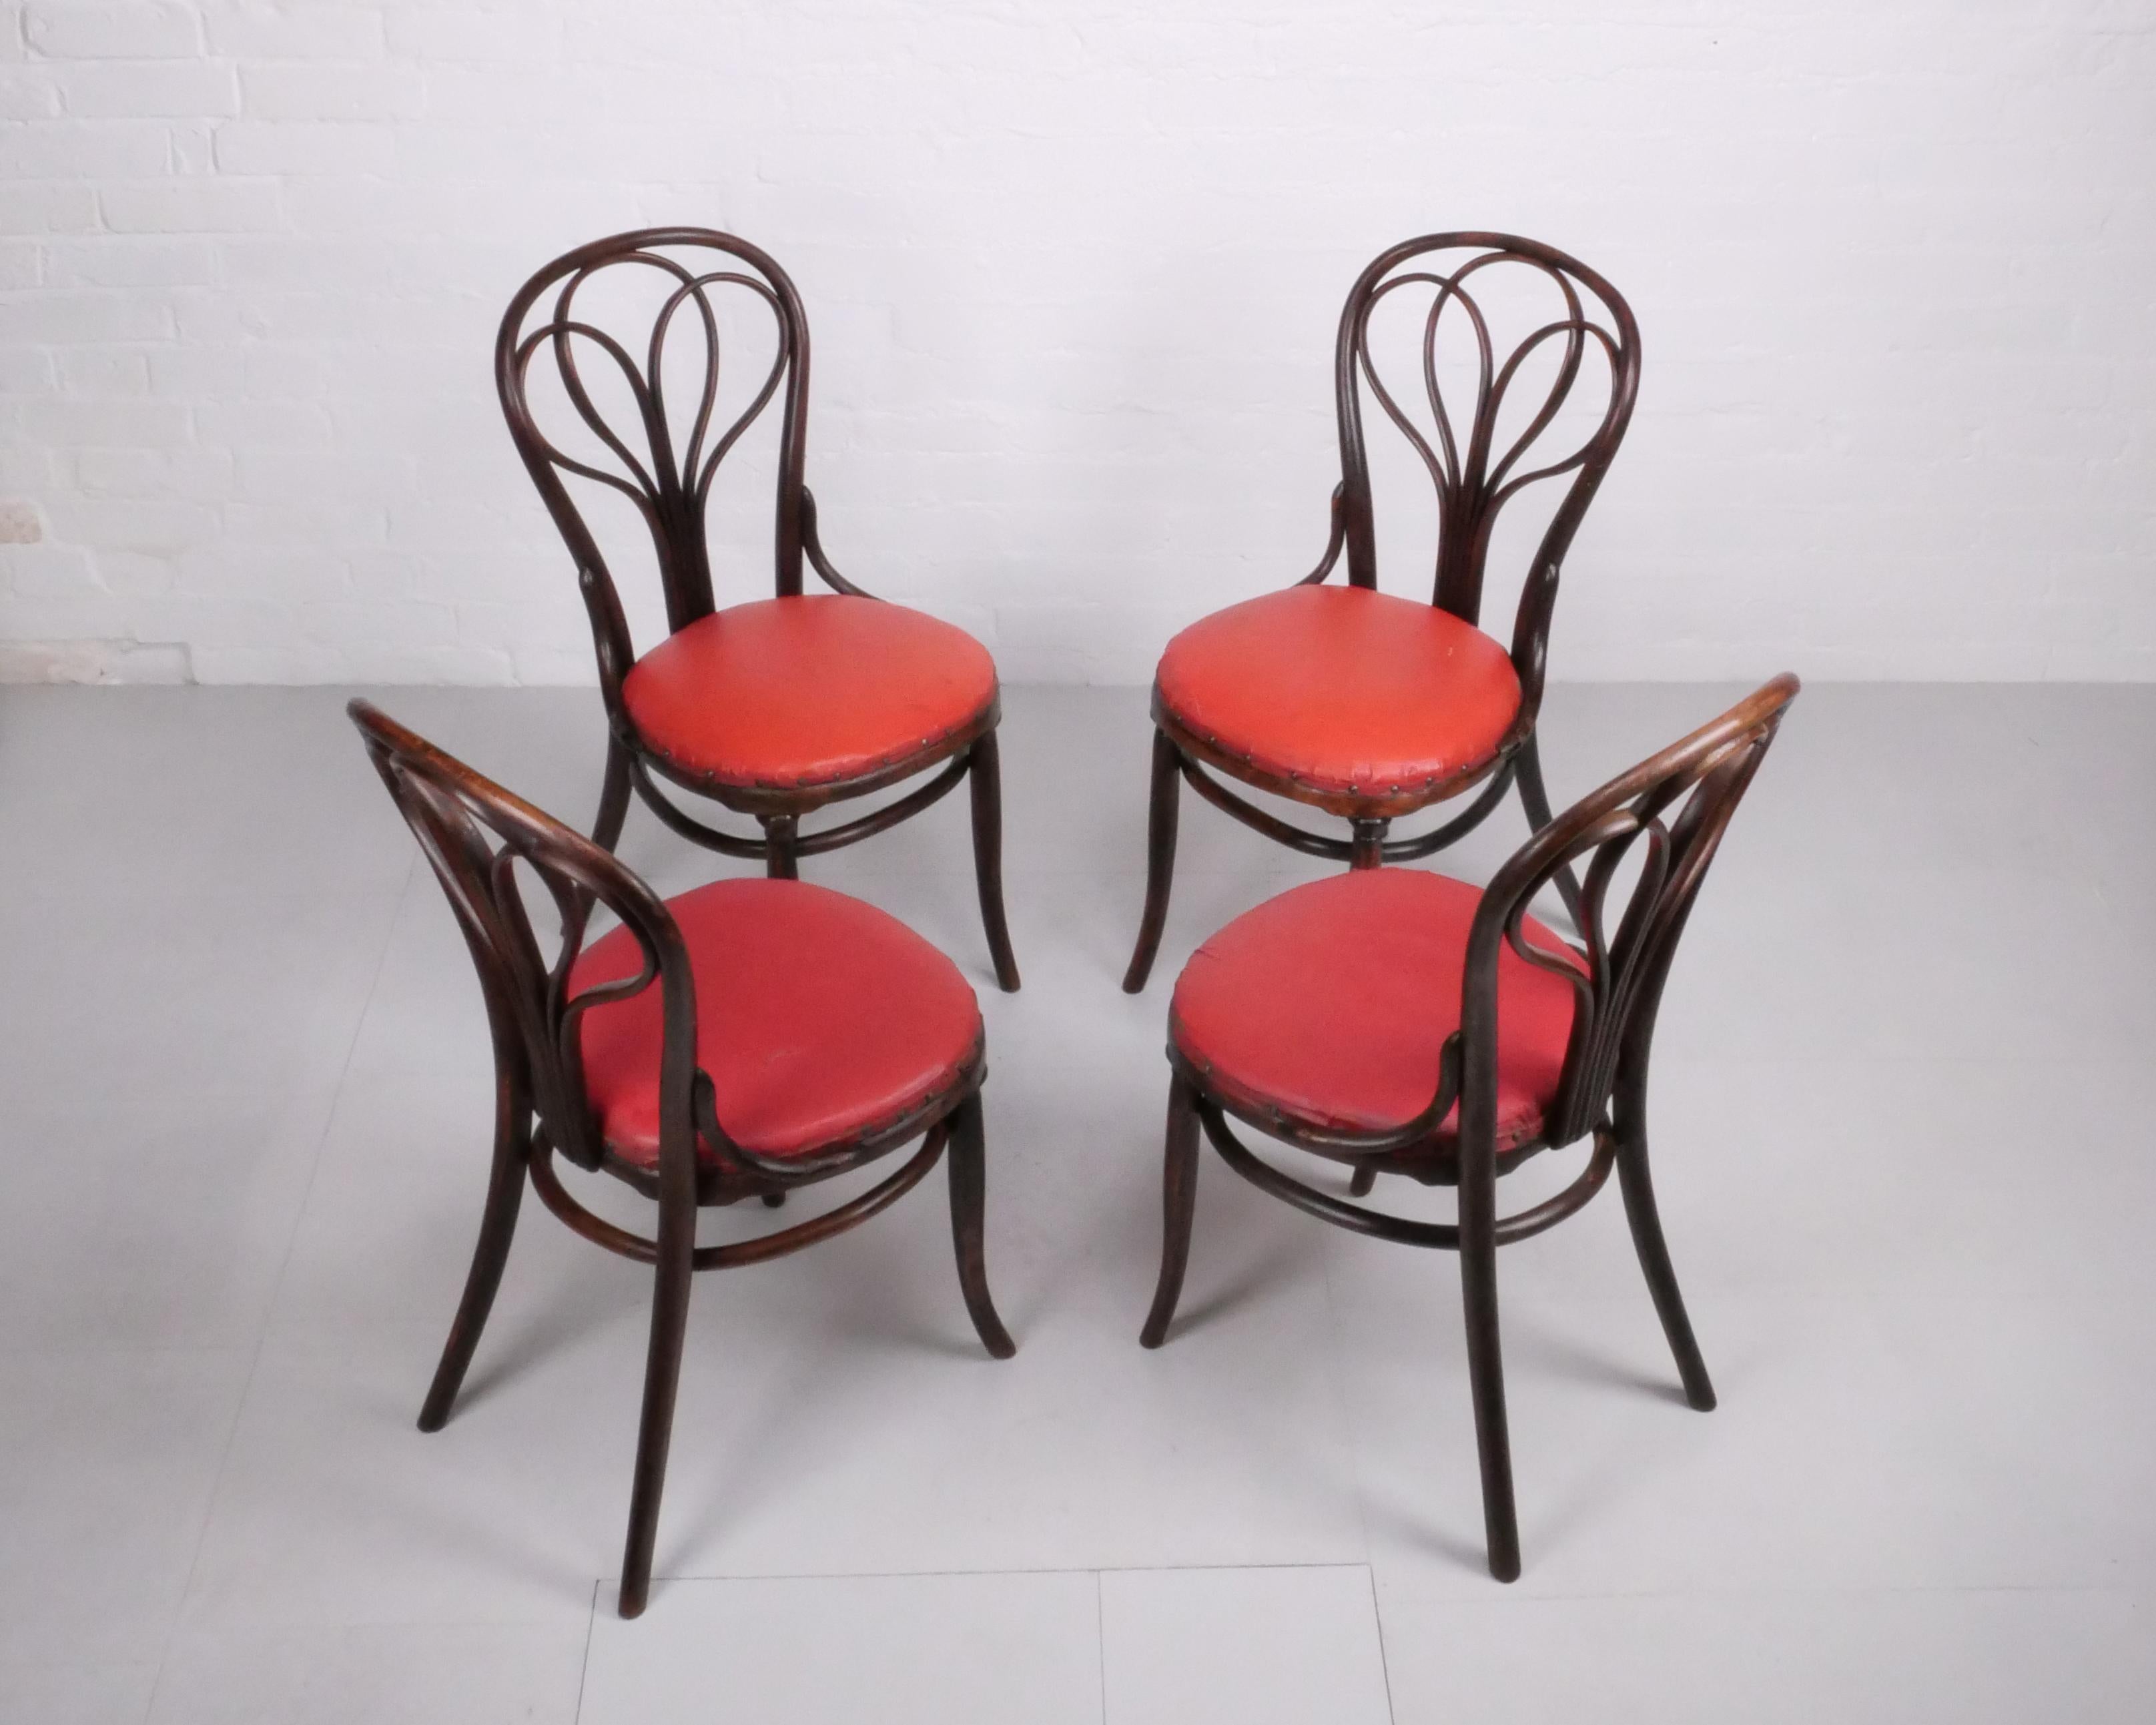 Art Nouveau Set of 4 no.25 dining chairs by Gebrüder Thonet, c. 1870 For Sale